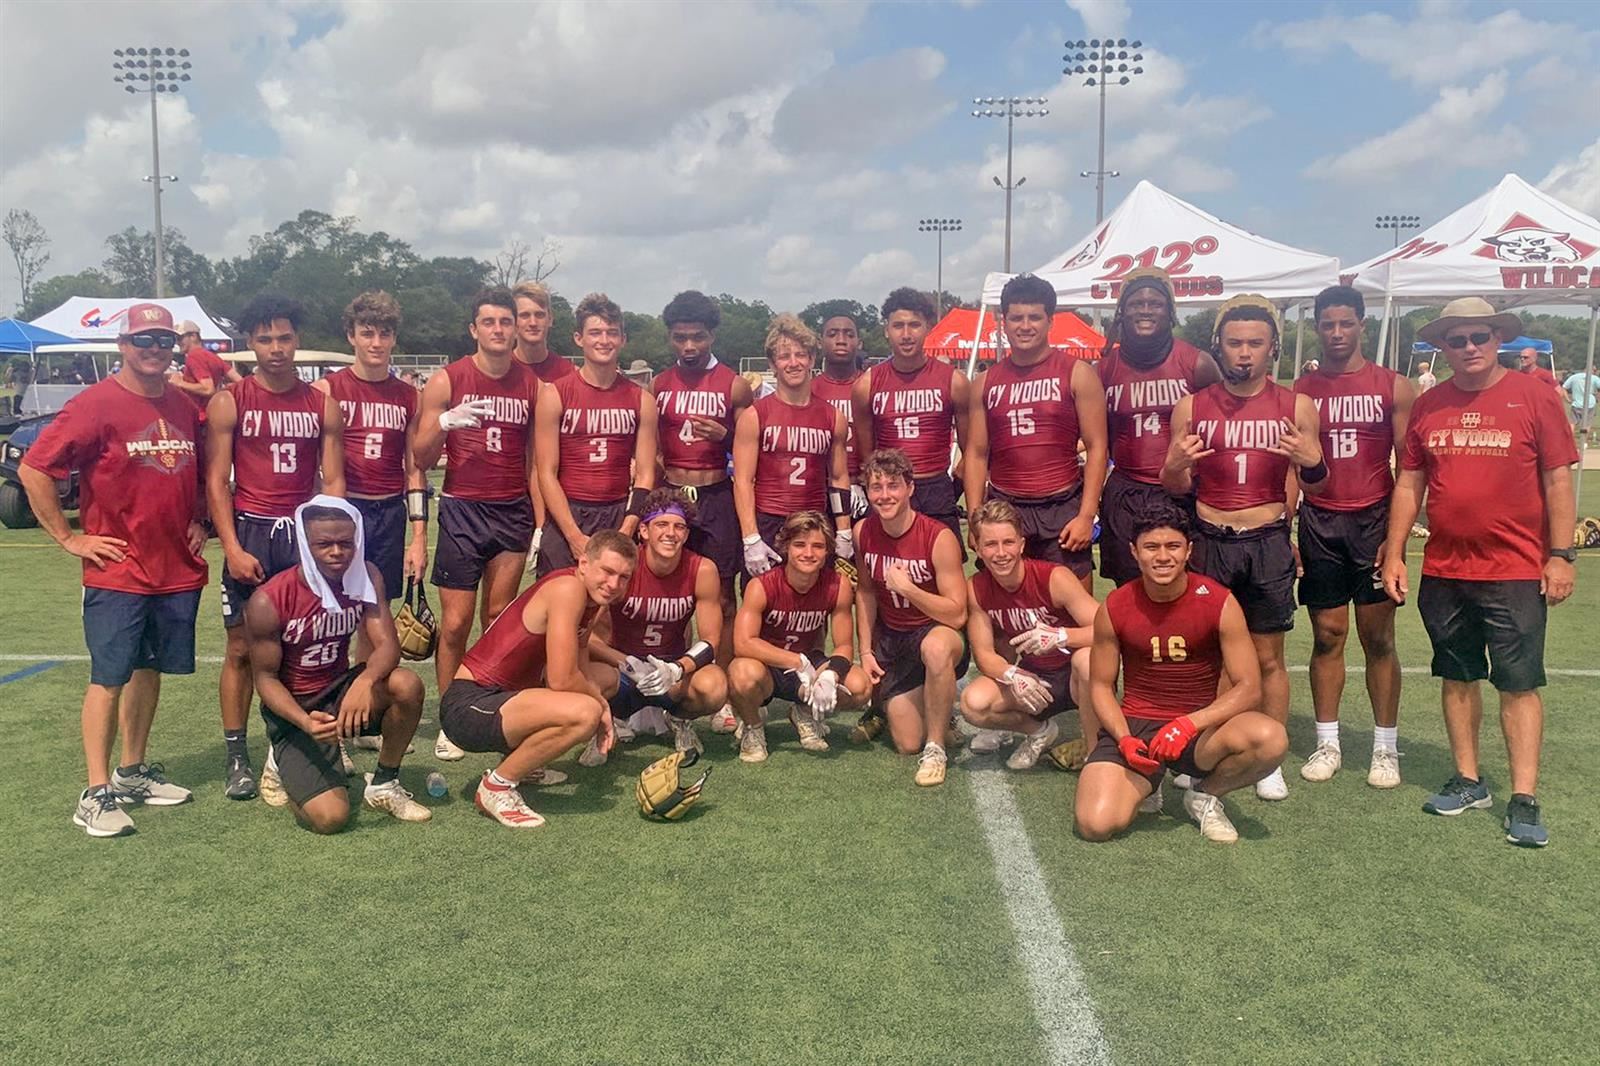 The Cypress Woods High School 7-on-7 team reached the Div. I quarterfinals of the state tournament.